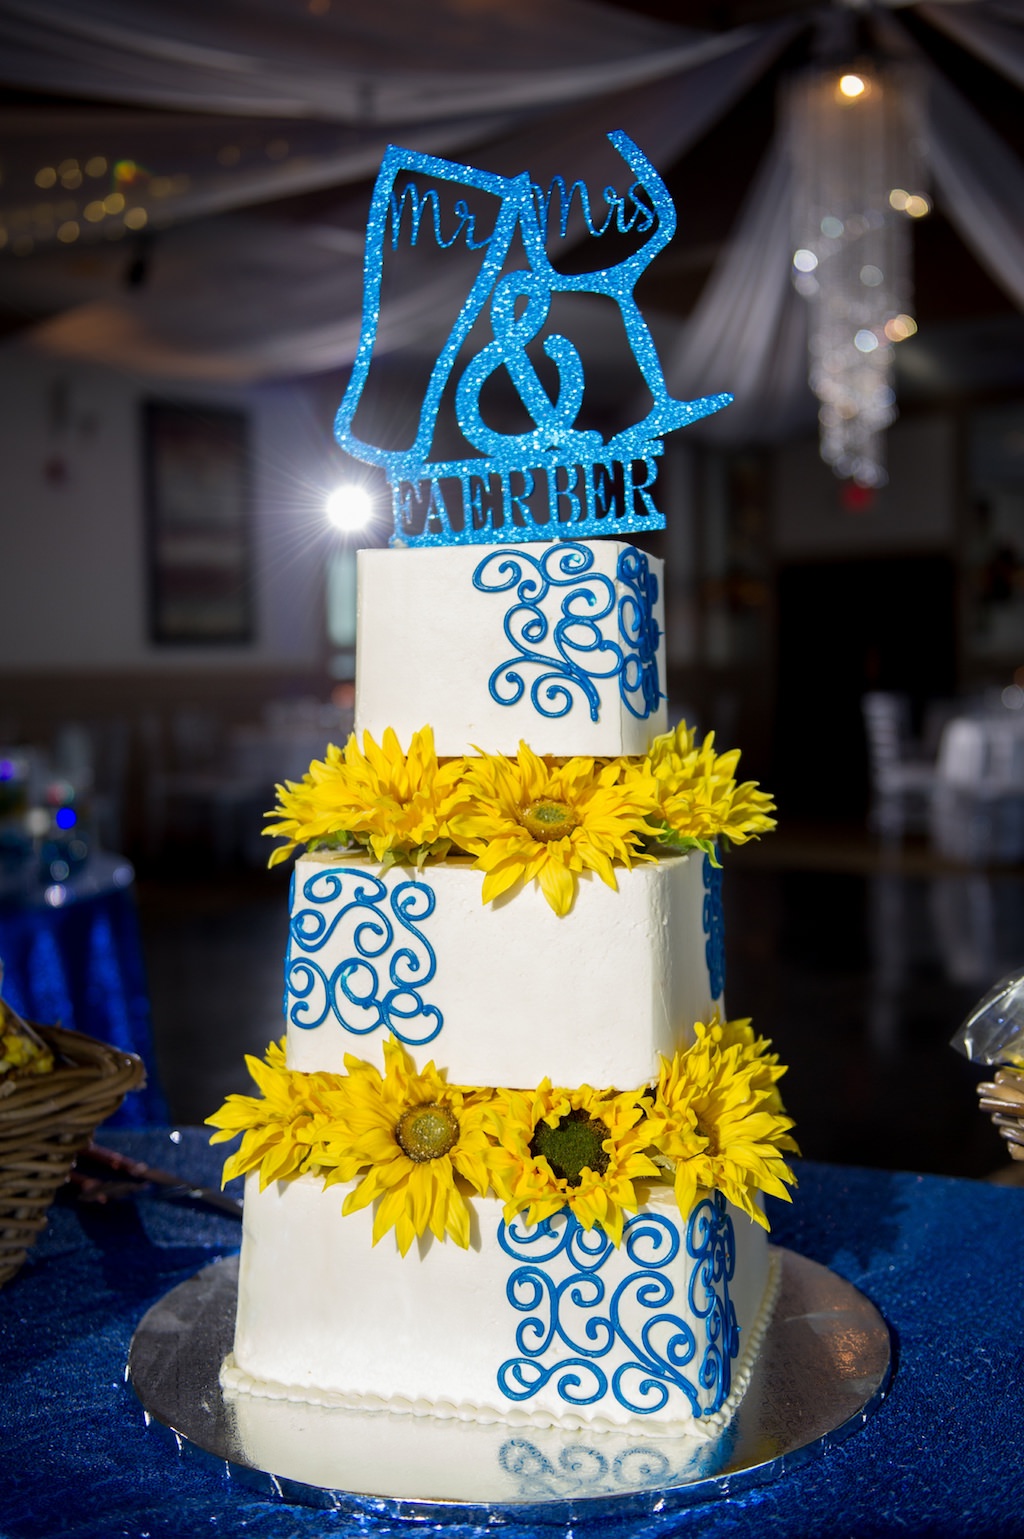 Three Tier White and Blue Wedding Cake with Yellow Sunflower Layers and Custom Sparkle Blue Laser Cut Cake Topper | Tampa Bay Photographer Andi Diamond Photography | Tampa Baker A Piece of Cake